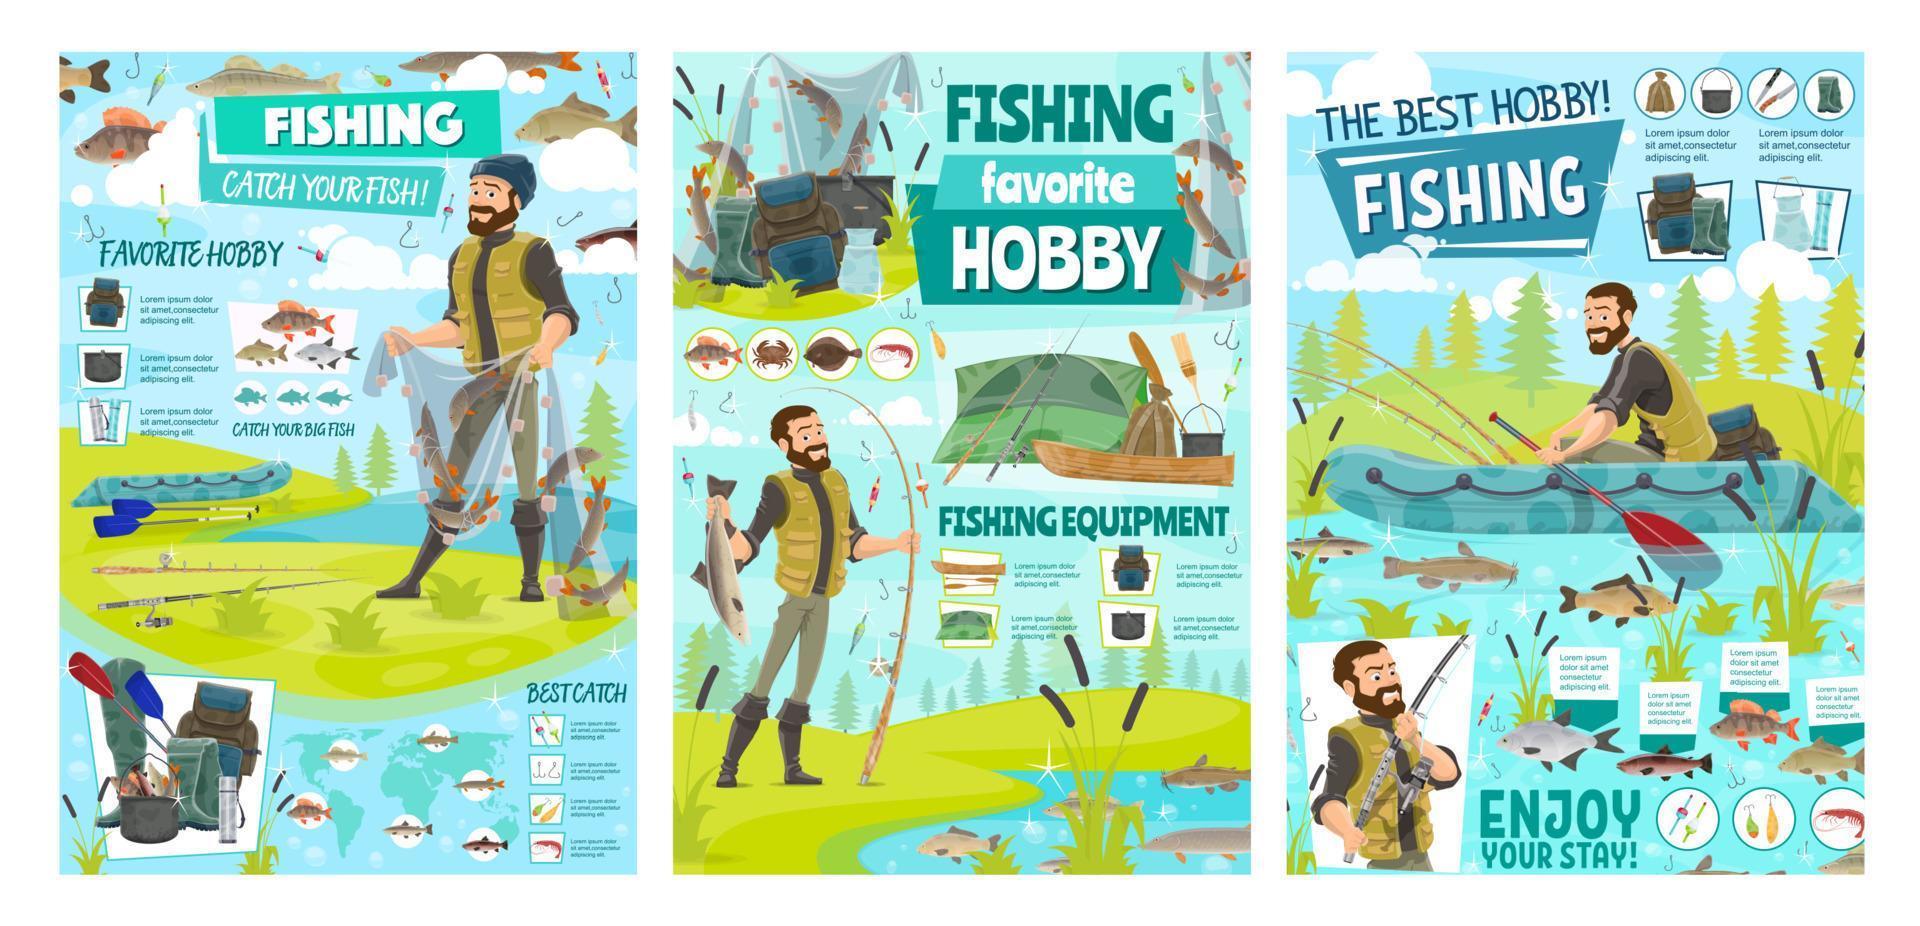 Fishing hobby, big fish and seafood catch sport vector